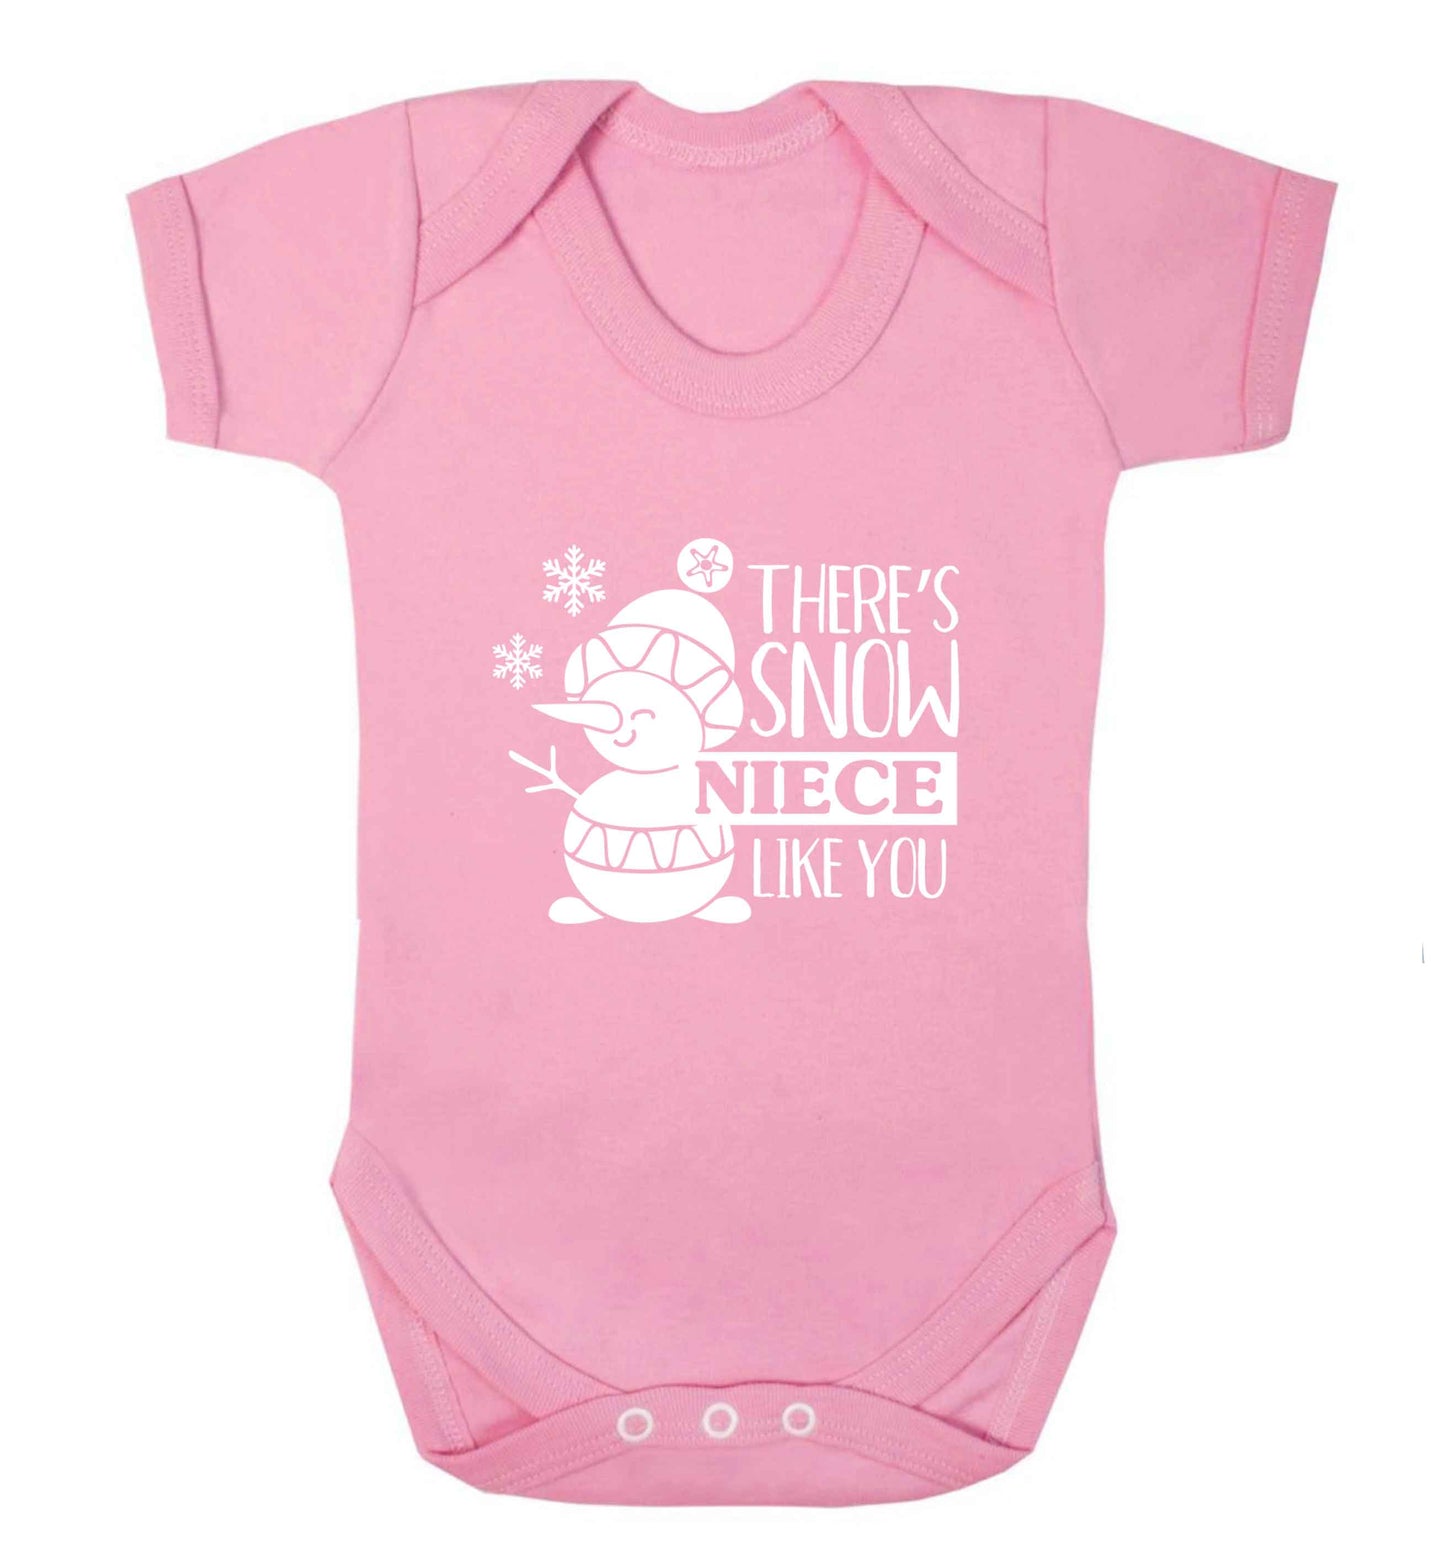 There's snow niece like you baby vest pale pink 18-24 months